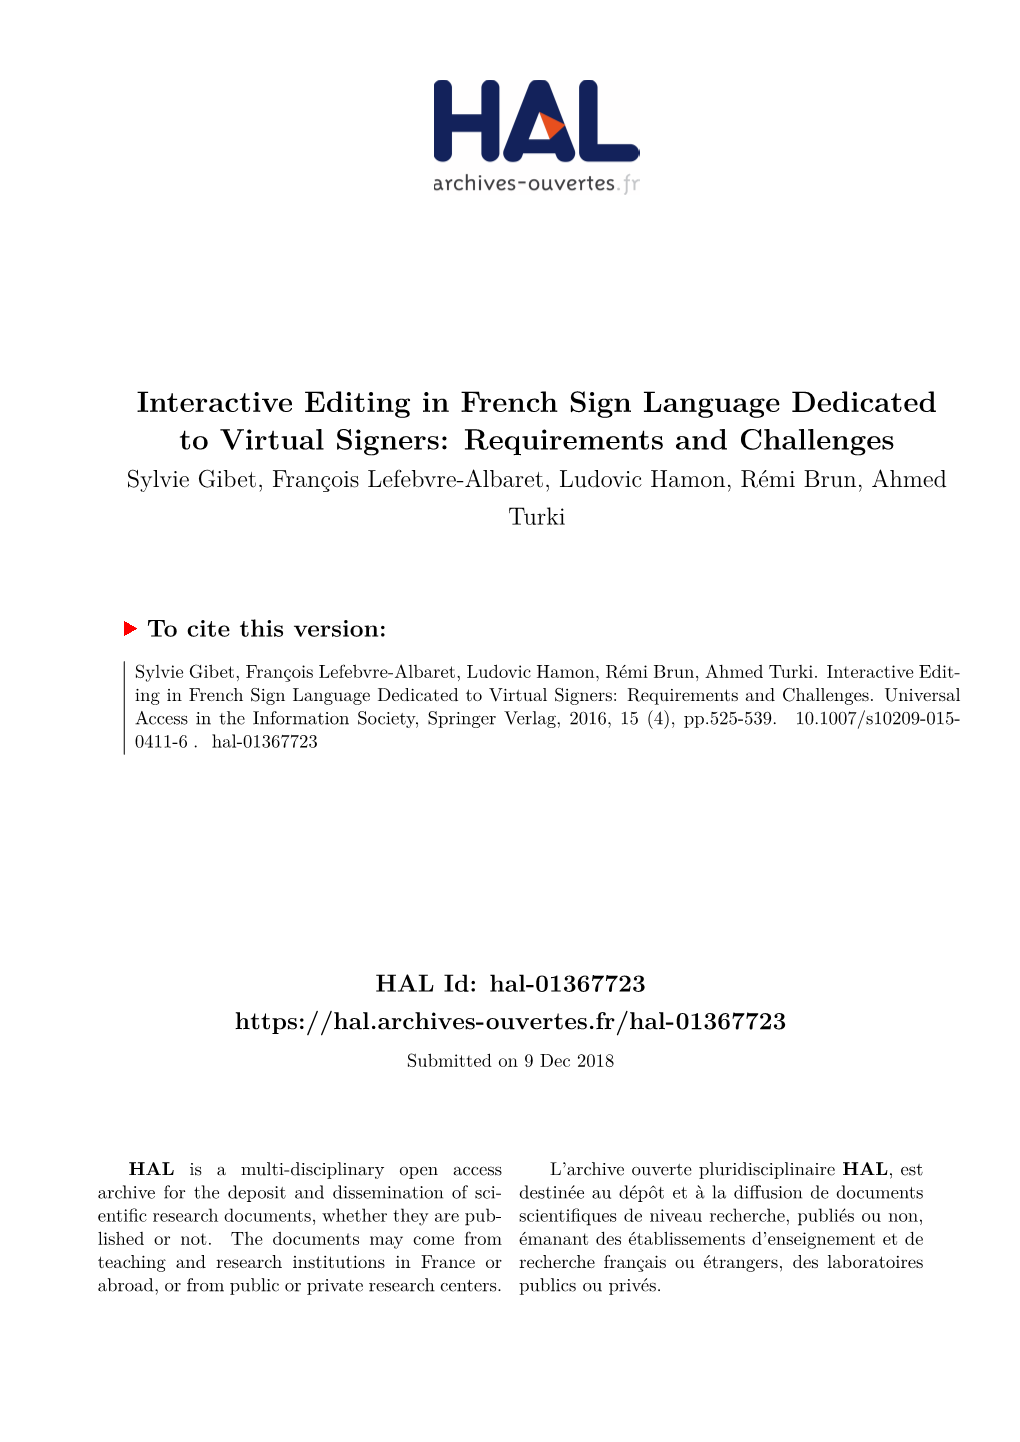 Interactive Editing in French Sign Language Dedicated to Virtual